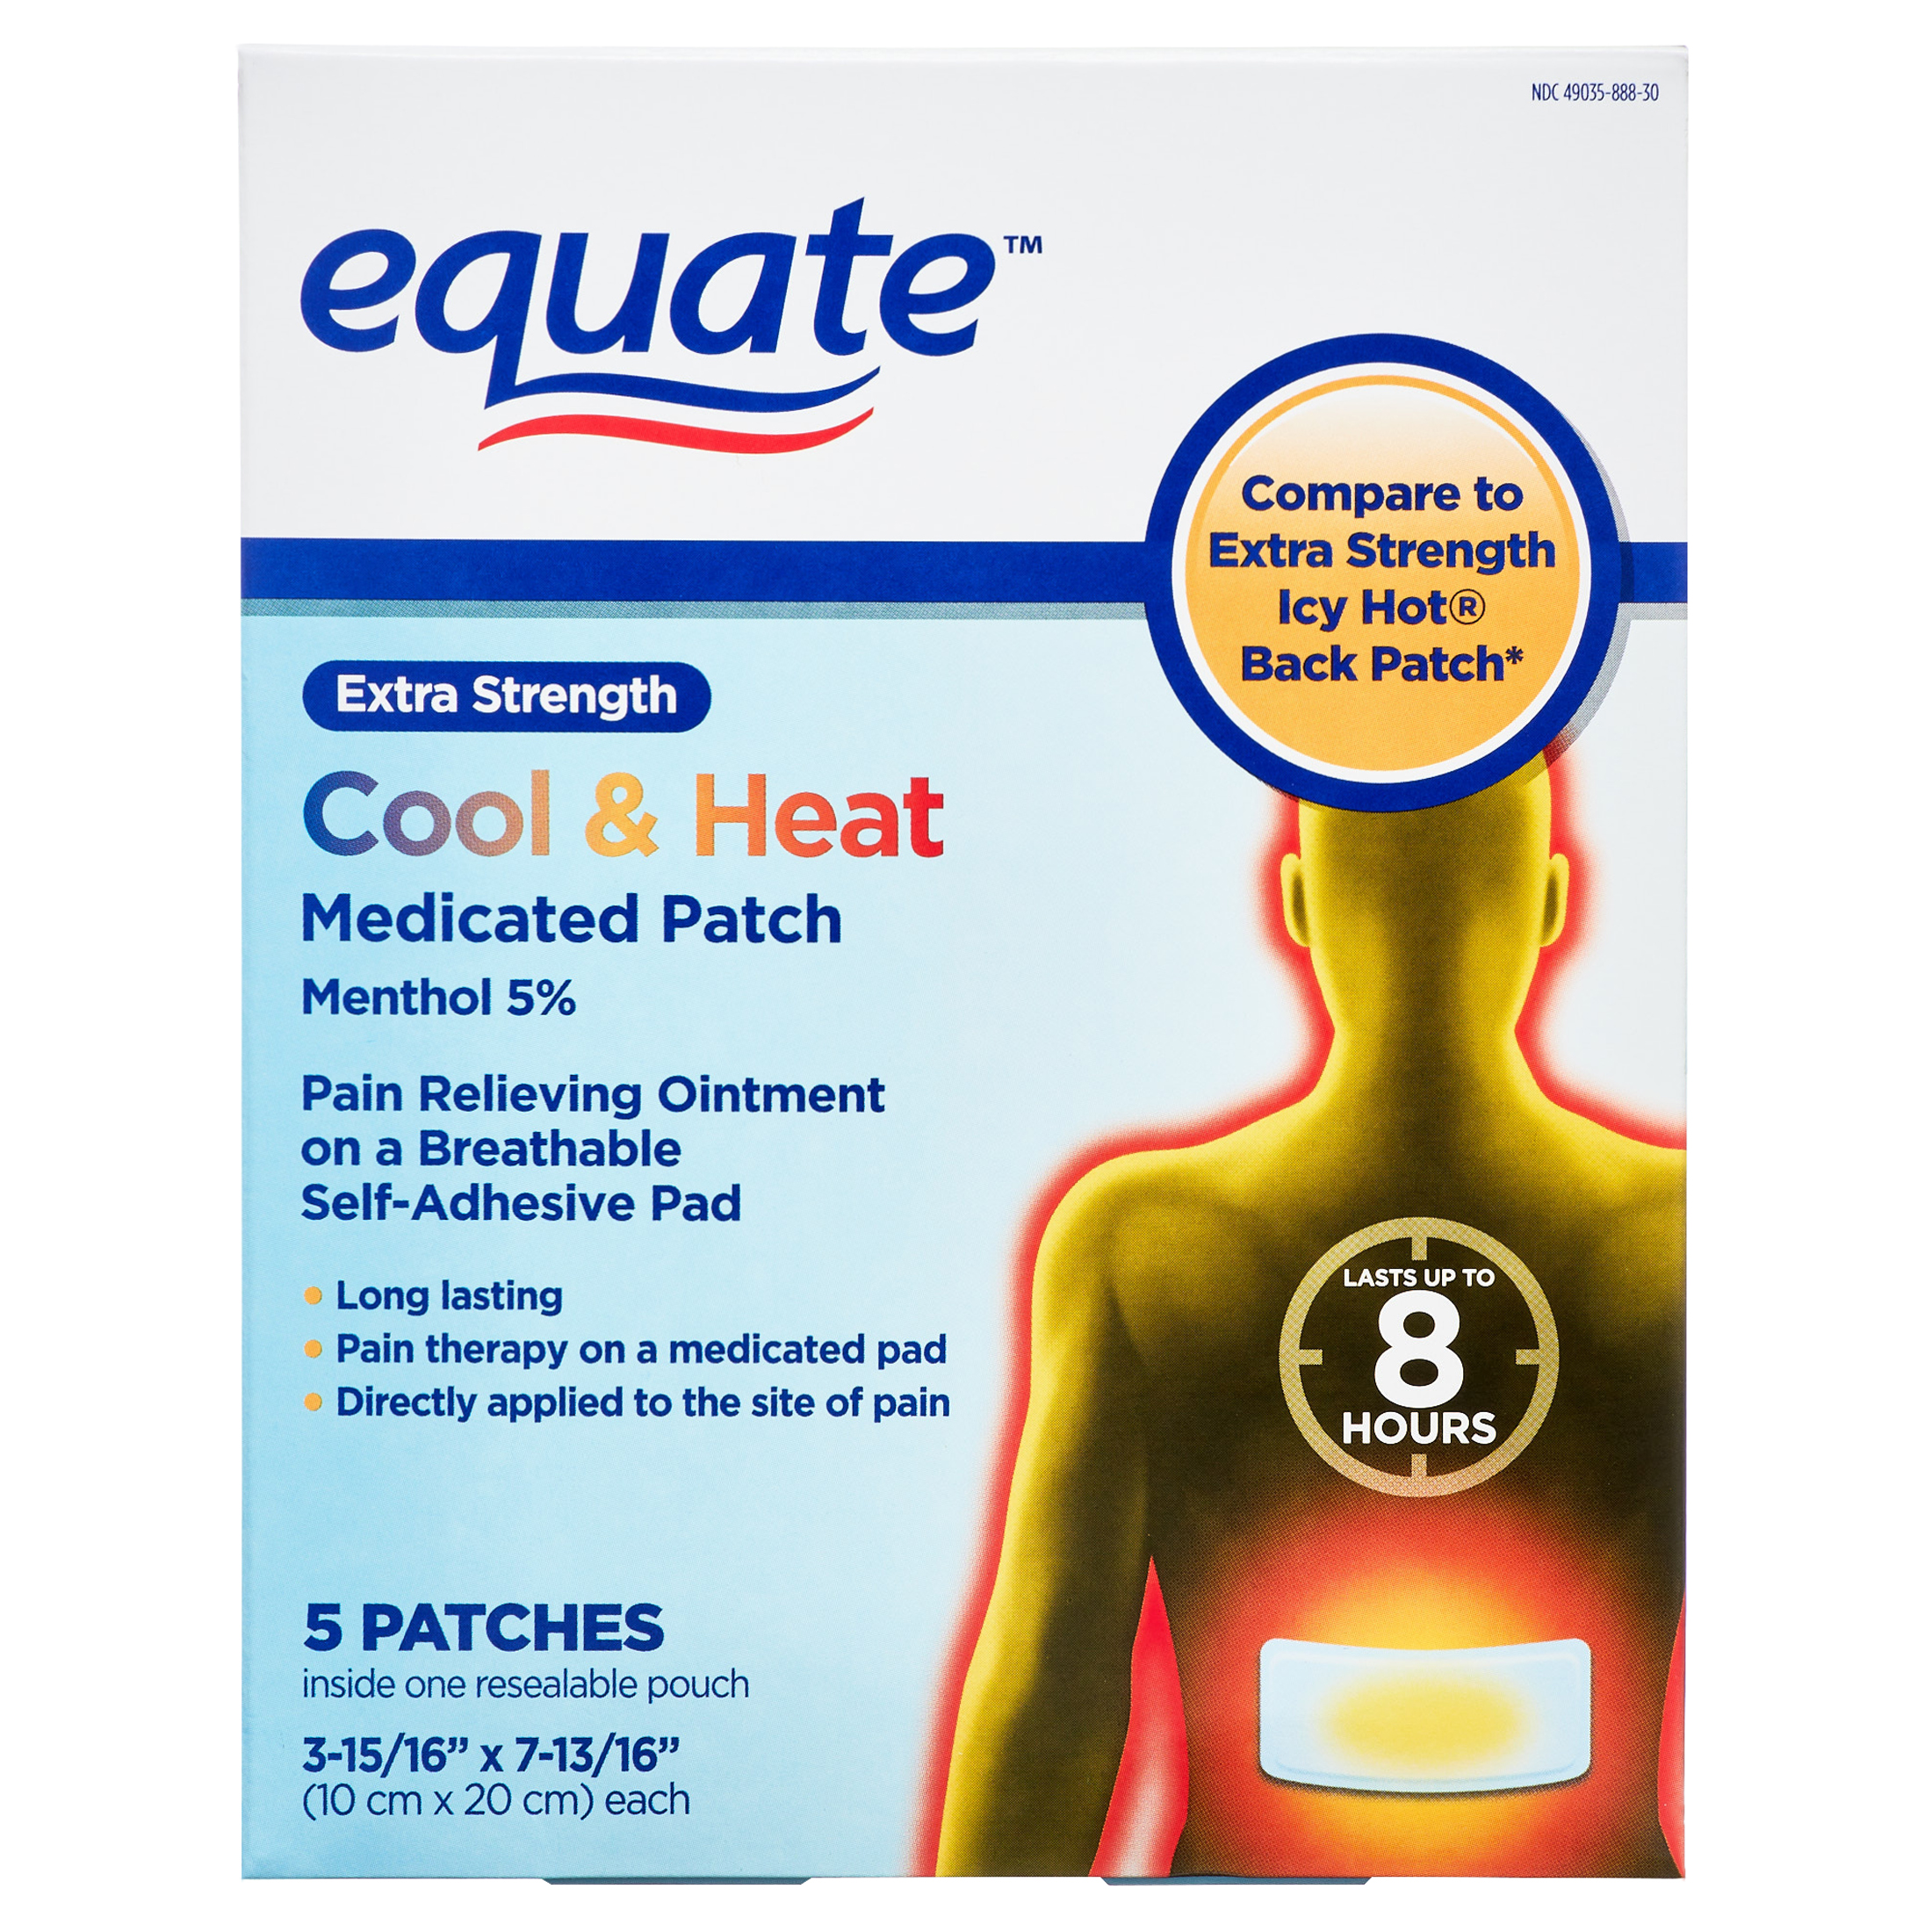 Equate Extra Strength Cool & Heat Medicated Patches, 5 Count - image 1 of 10